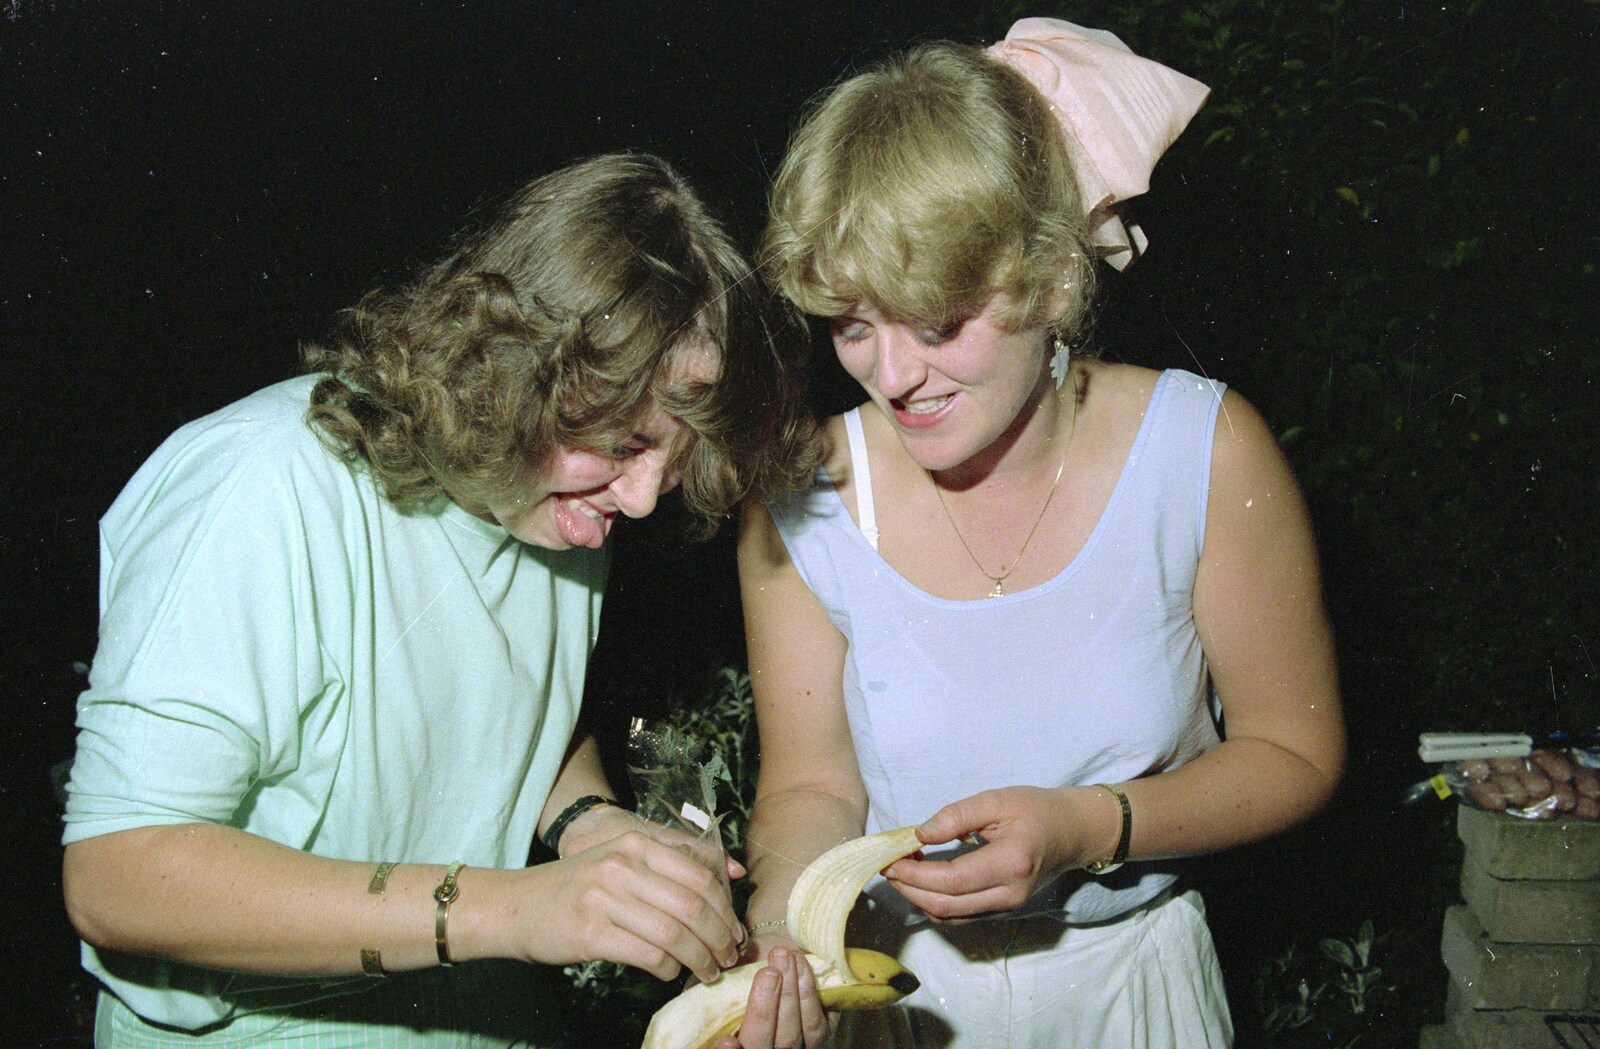 Chris and Phil's Party, Hordle, Hampshire - 6th September 1989: Something lascivious goes on with a banana